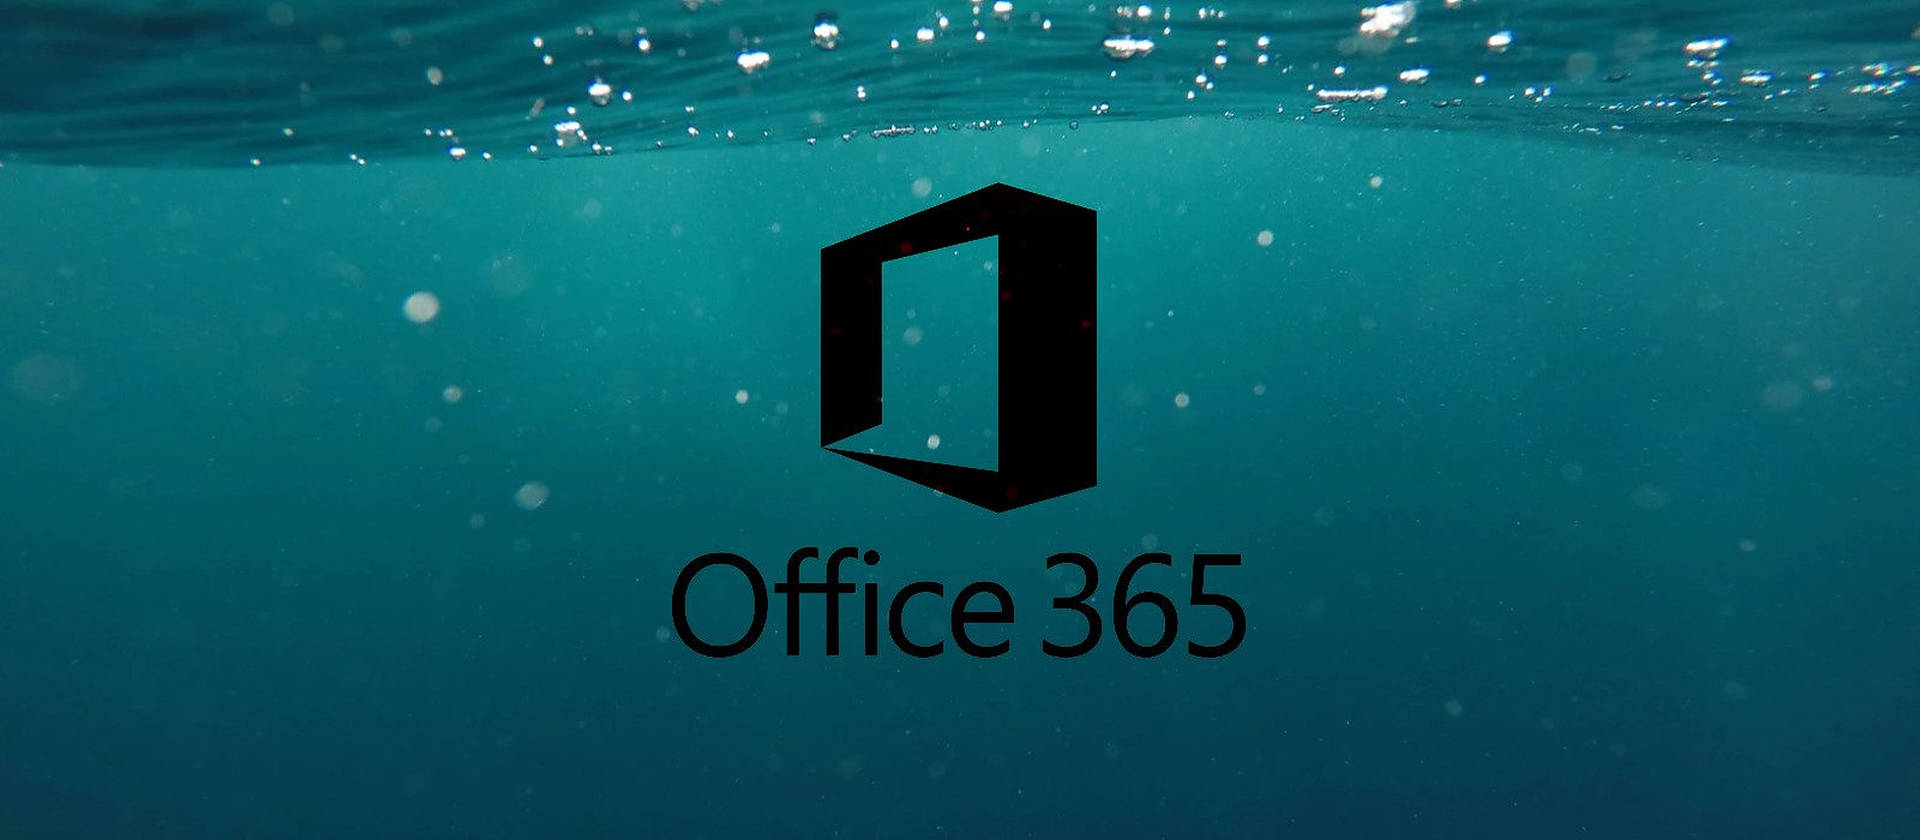 Office 365 Teal Poster Background